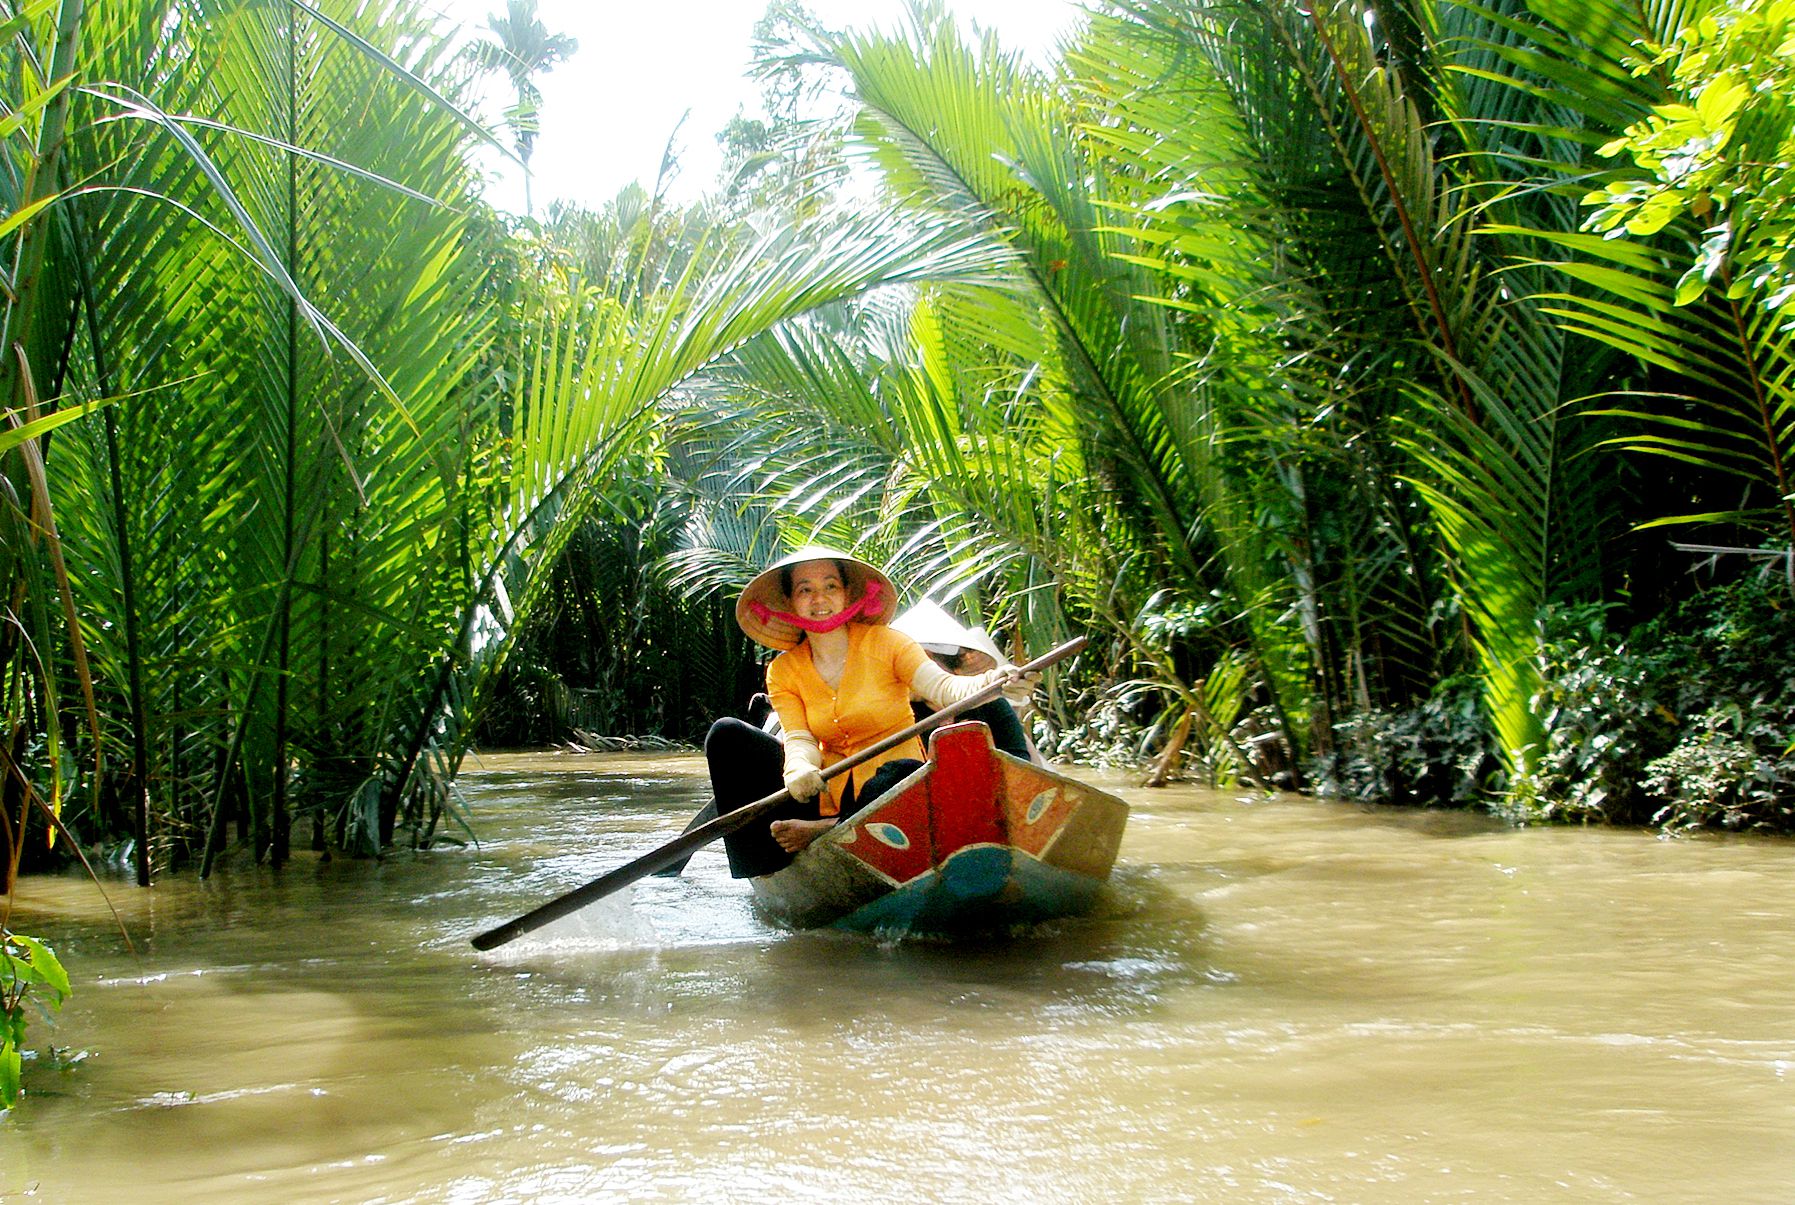 FROM MUI NE - MEKONG DELTA TOURS - SPECIAL OFFER 